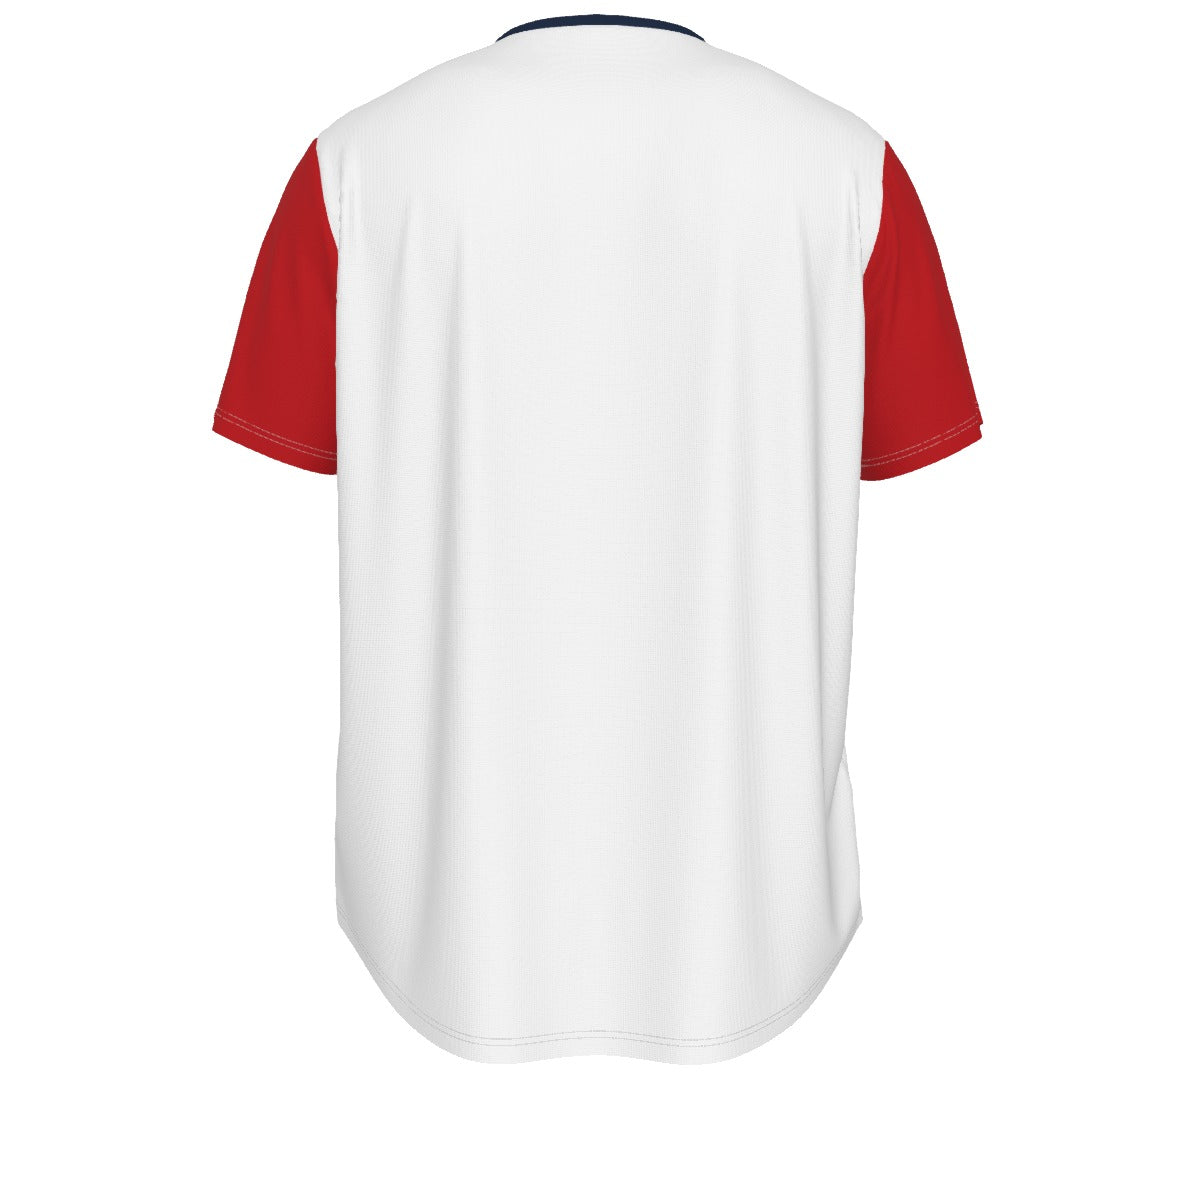 DZY P Classic - White/Red/Black - Men's Short Sleeve Rounded Hem by Dizzy Pickle